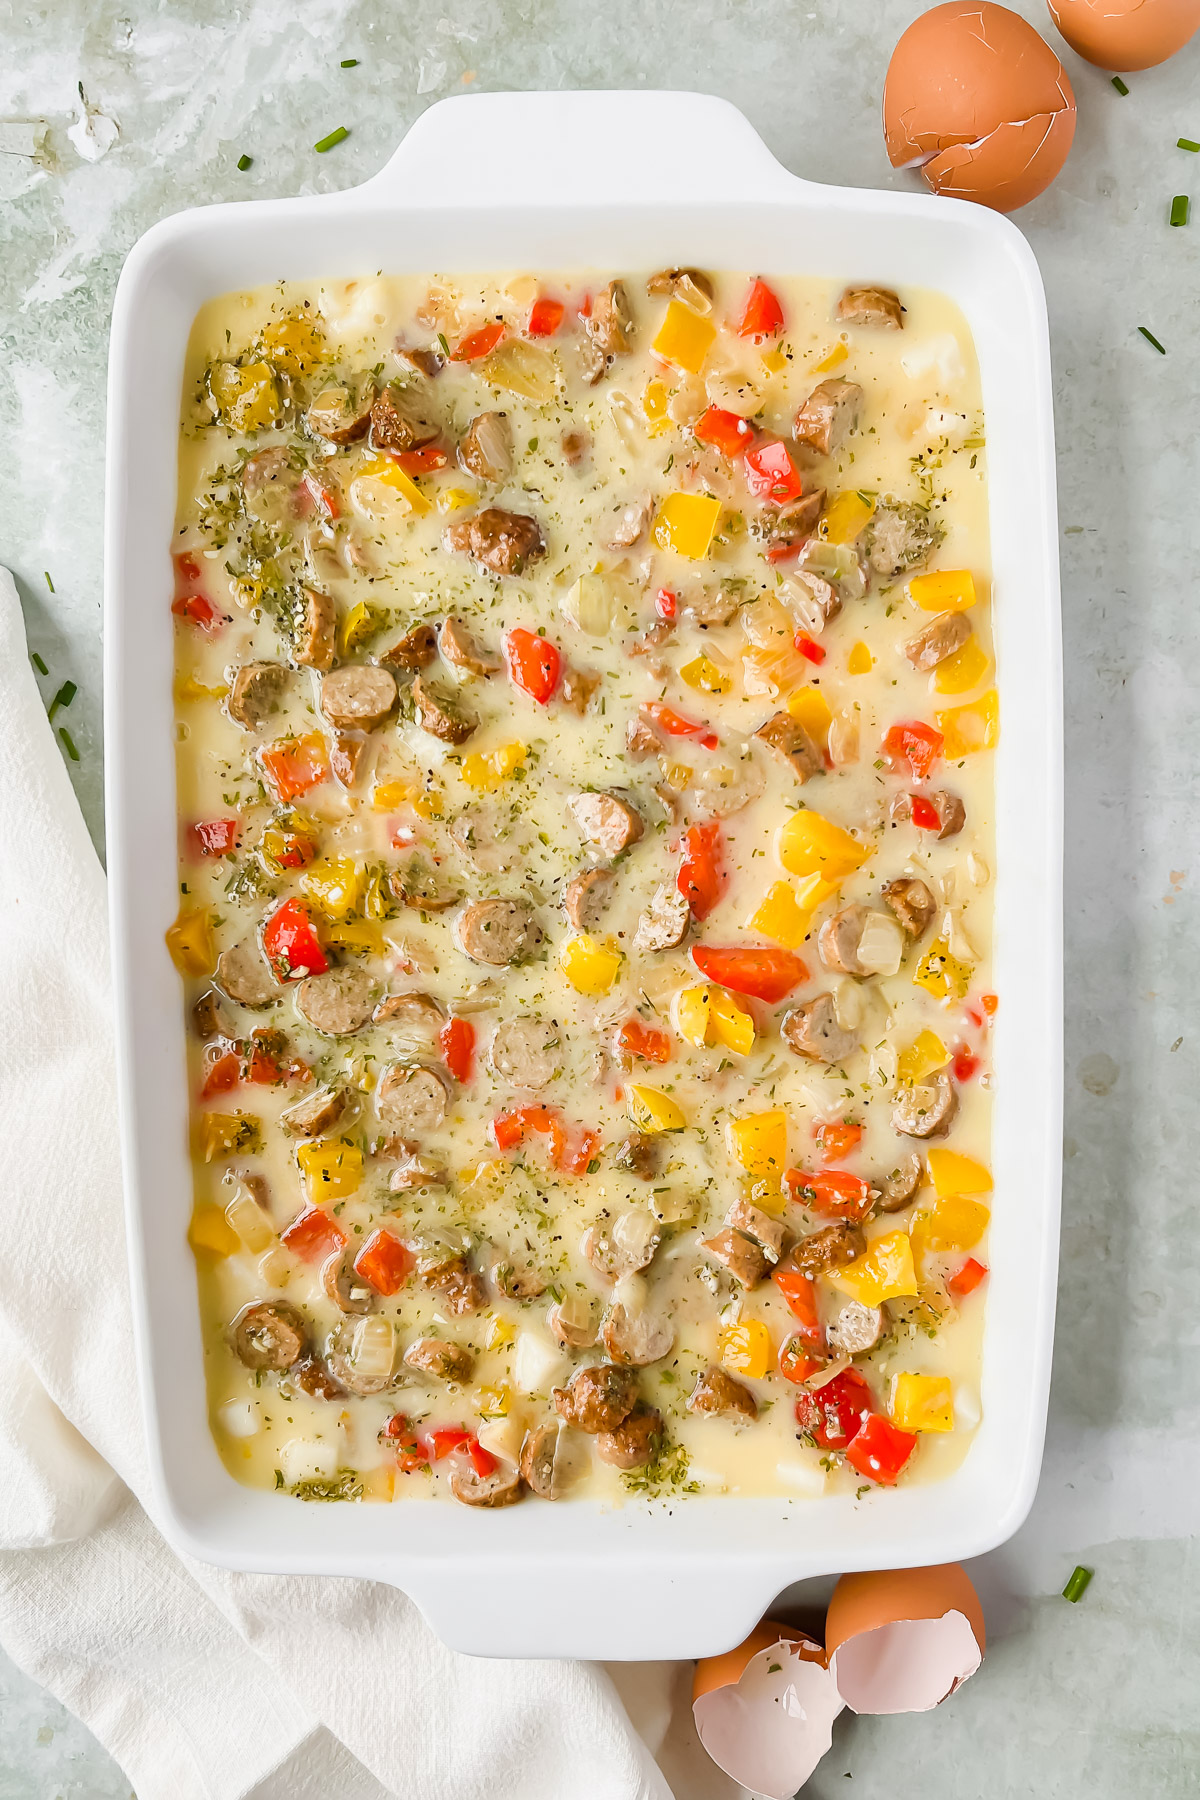 raw loaded hashbrown casserole topped with seasonings in white rectangular baking dish.